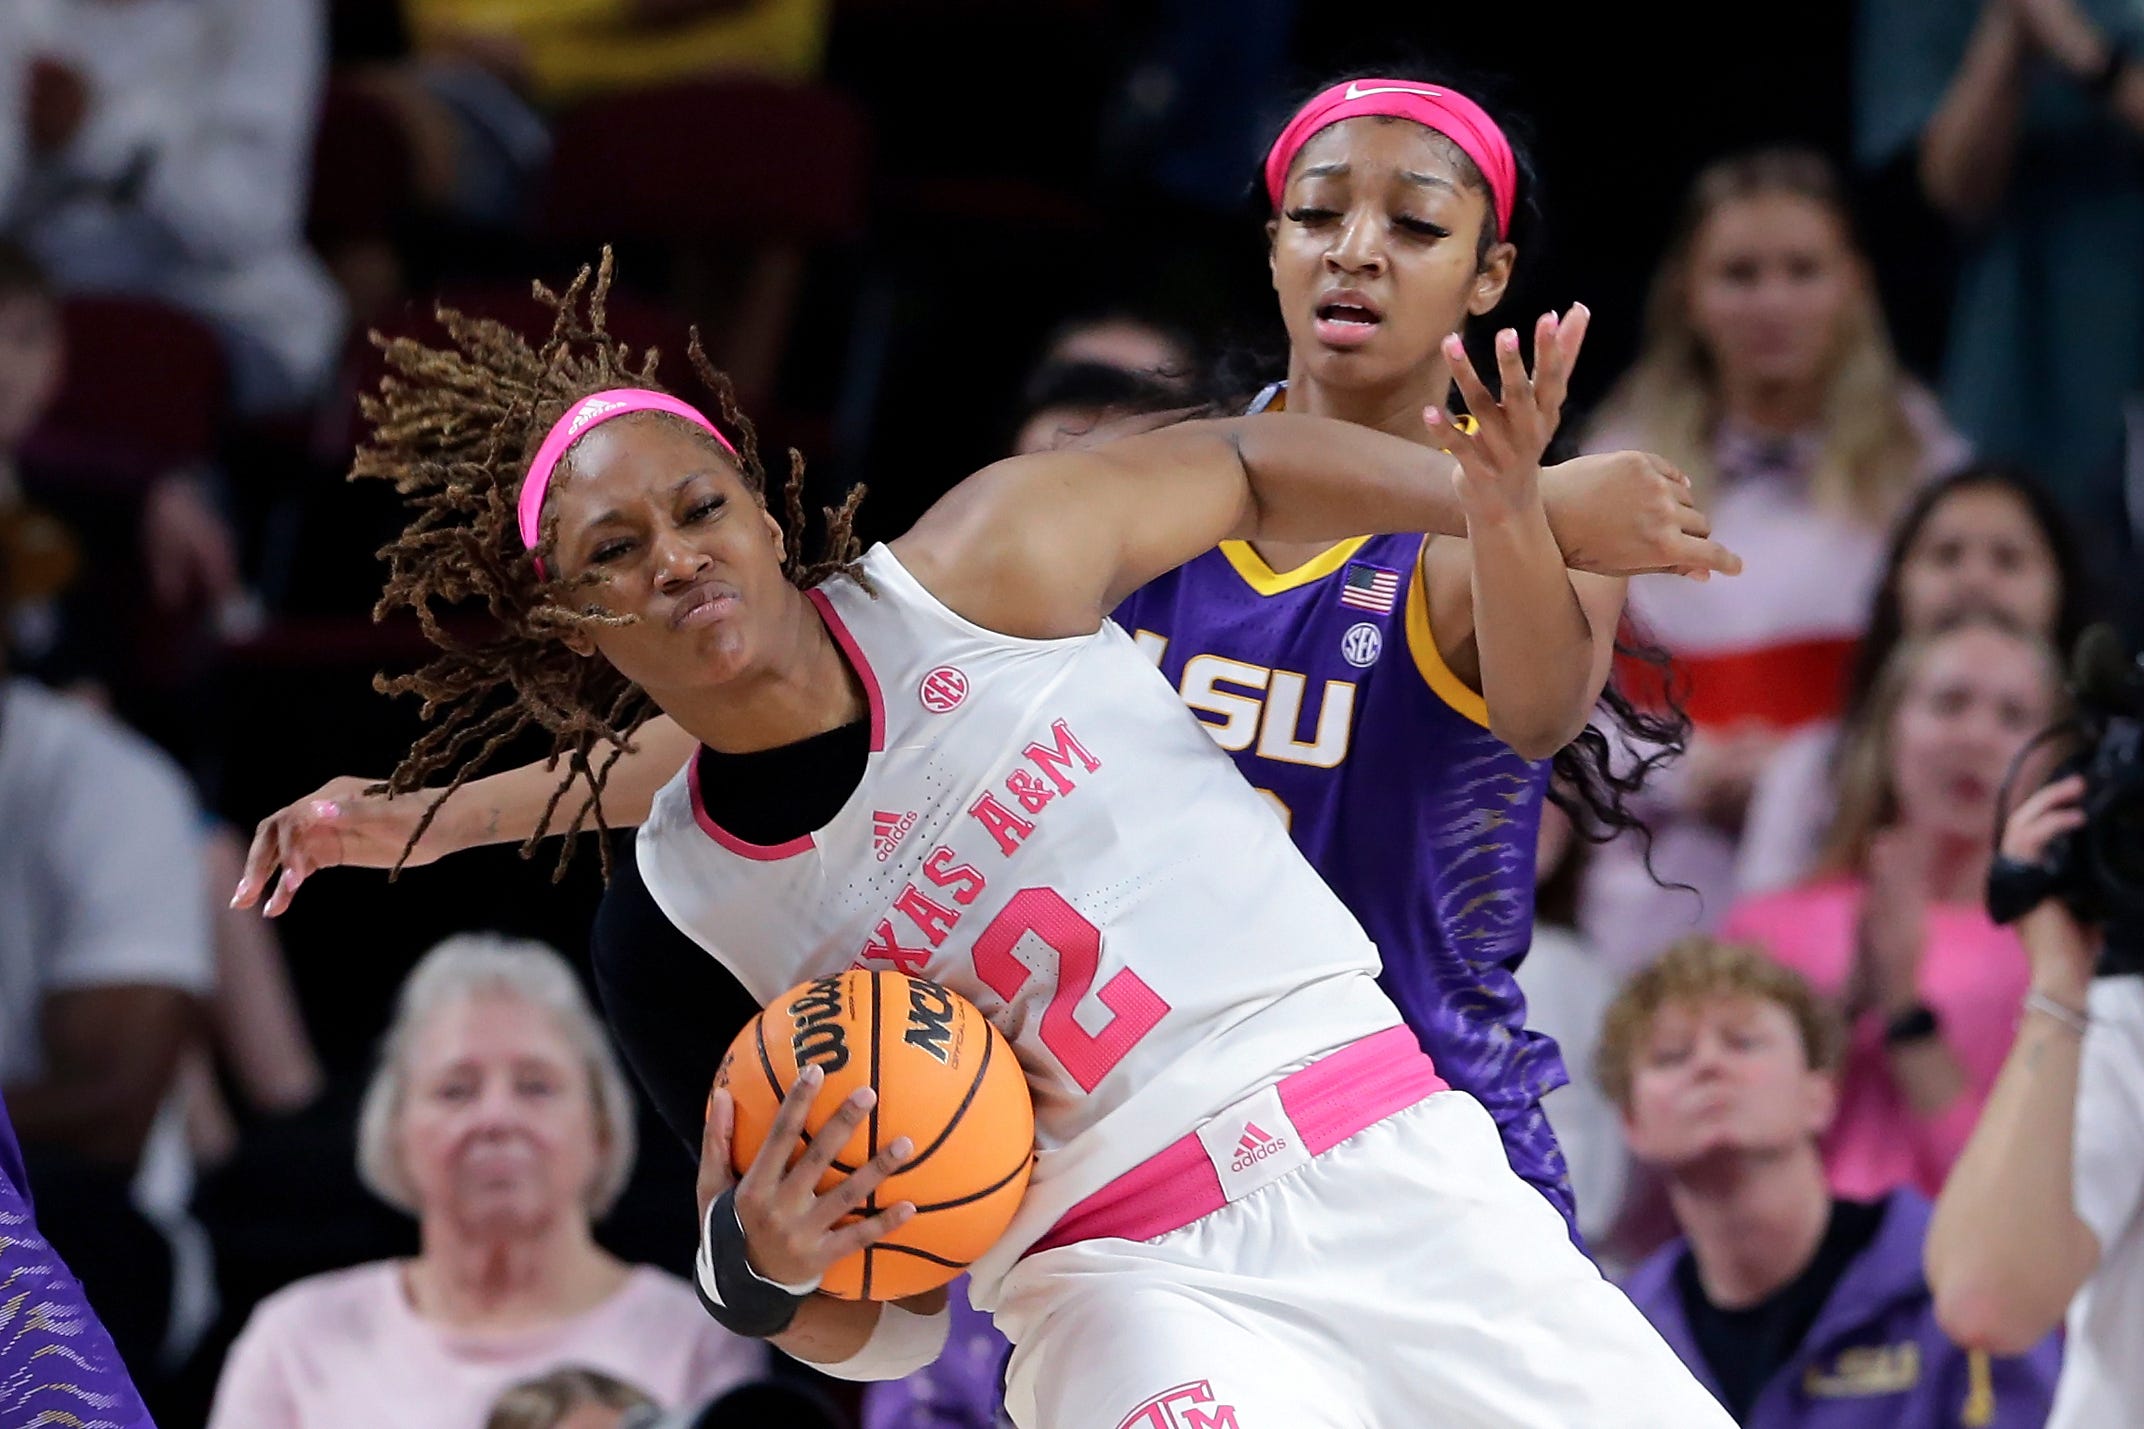 Texas A&M forward Janiah Barker, left, gets tangled up on a rebound with LSU forward Angel Reese, right, during the second half of an NCAA college basketball game, Sunday, Feb. 5, 2023, in College Station, Texas. (AP Photo/Michael Wyke)